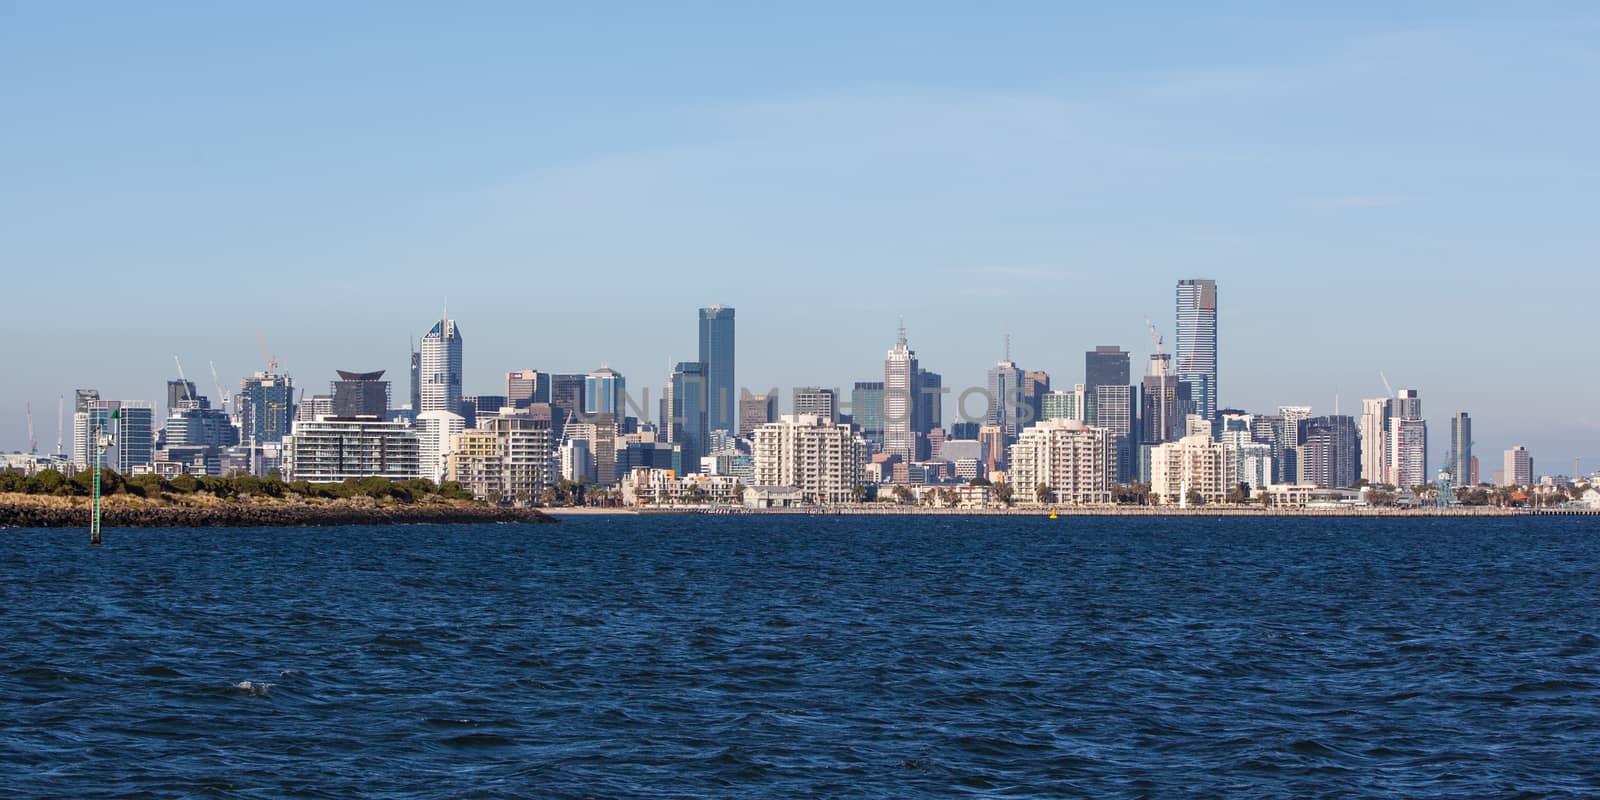 Melbourne skyline on a summer's day from Port Phillip Bay in Victoria, Australia